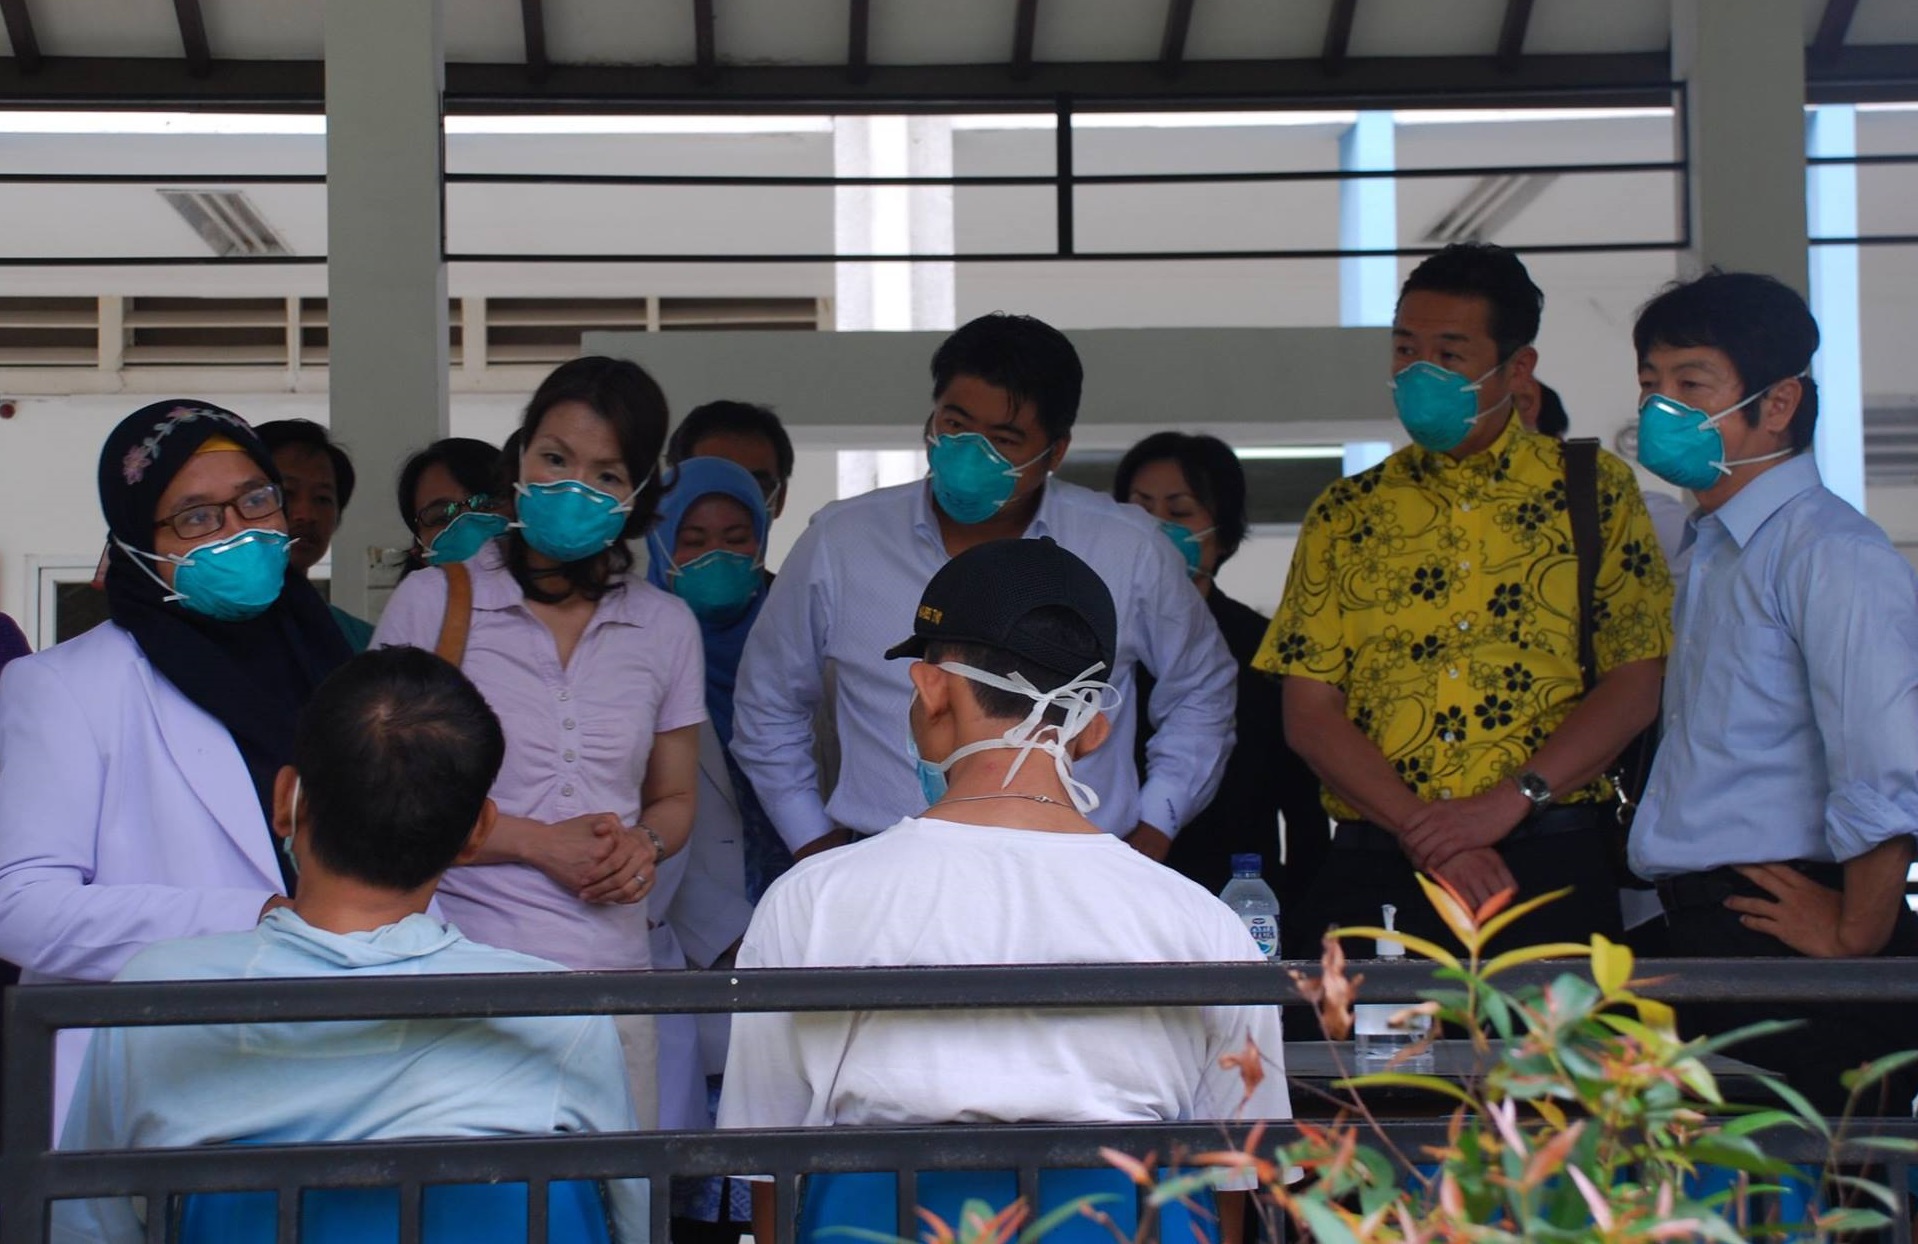 FGFJ Diet Task Force members listened to TB patients at Persahabatan Hospital